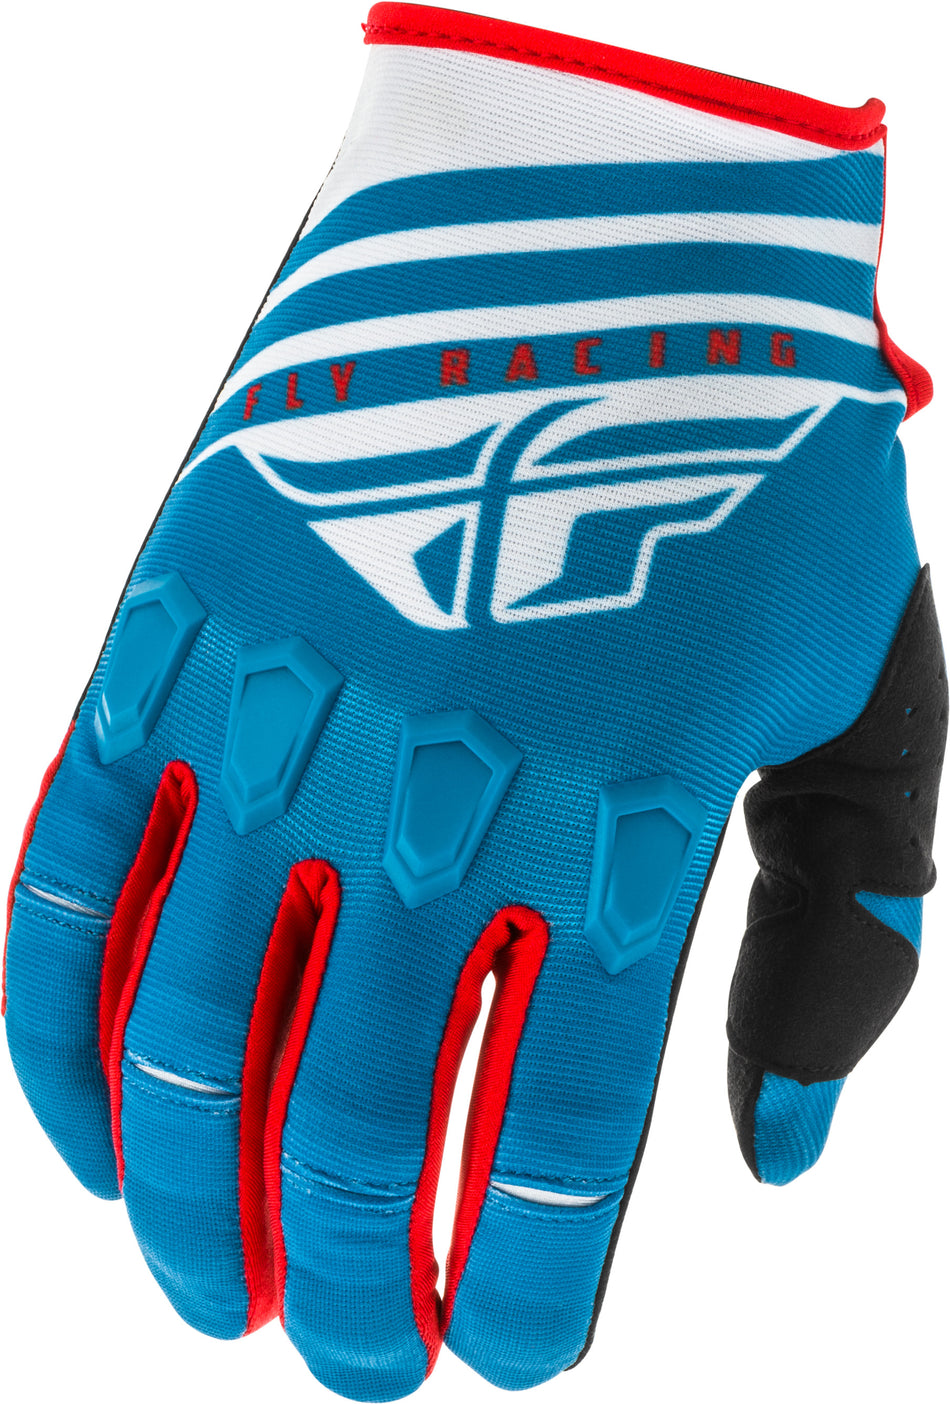 FLY RACING Kinetic K220 Gloves Blue/White/Red Sz 04 373-51104